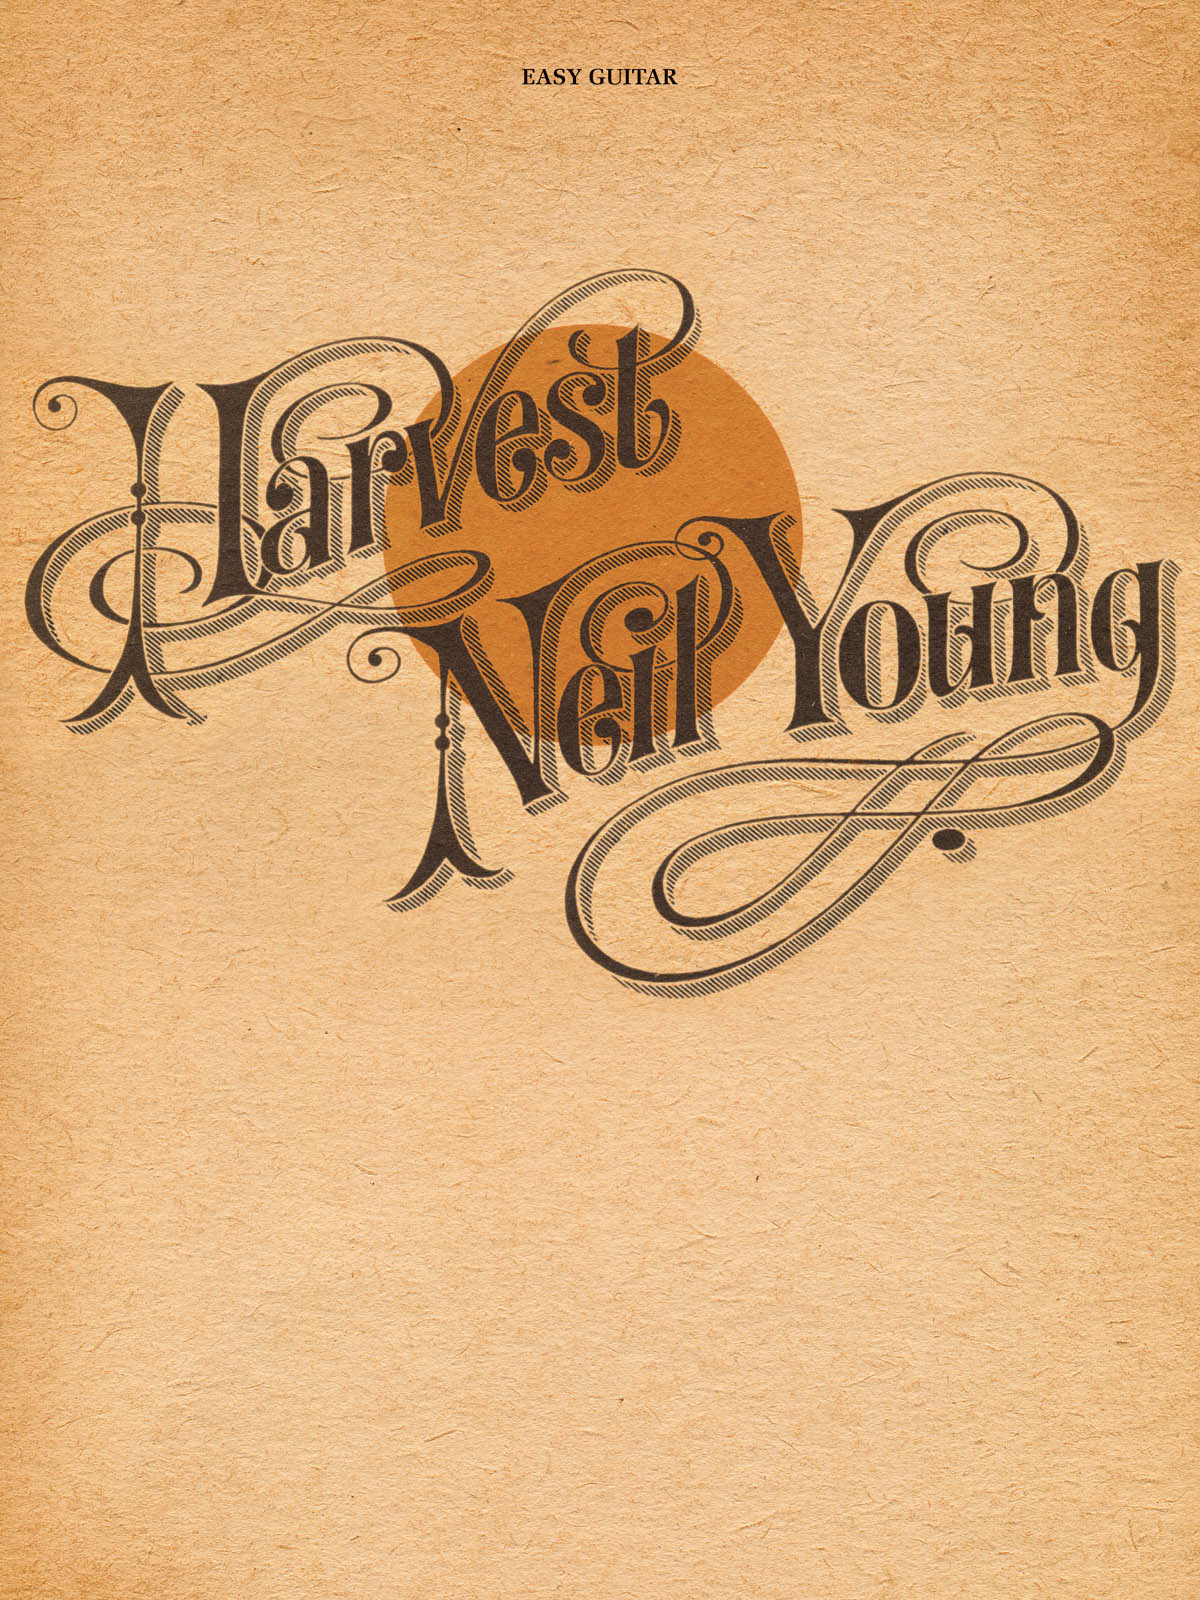 Neil Young: Neil Young - Harvest: Guitar Solo: Album Songbook